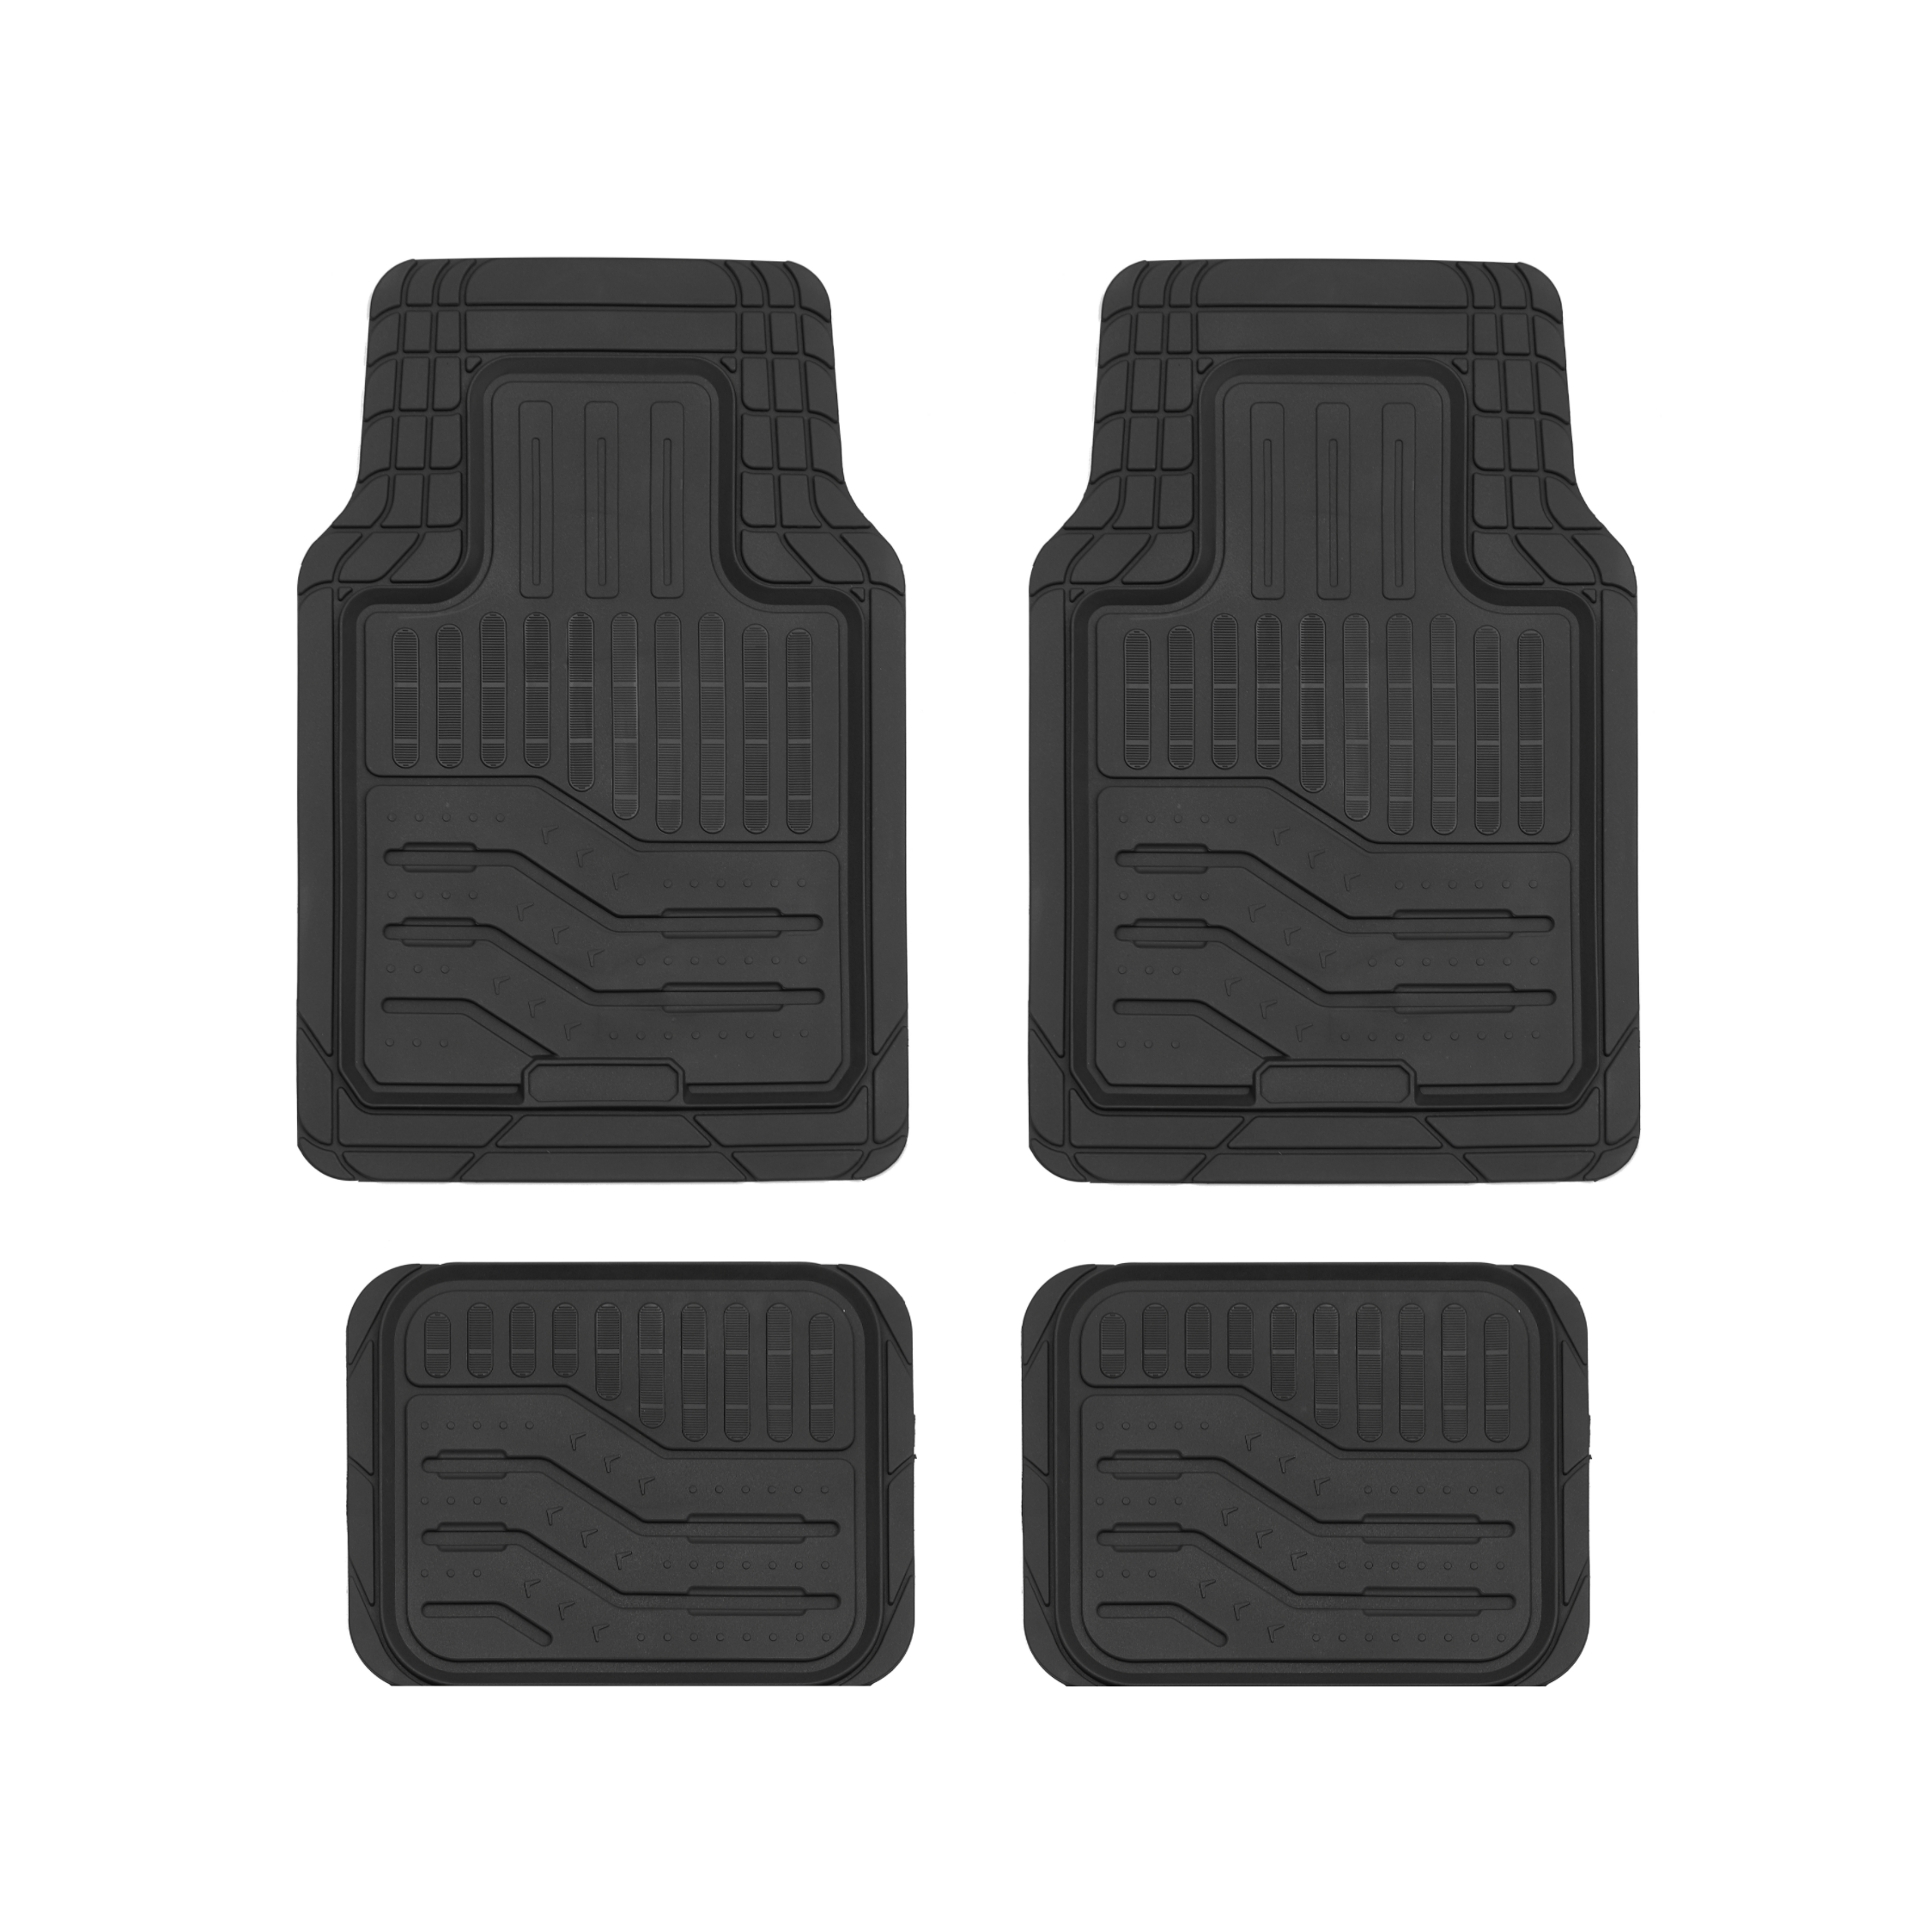 Top-Quality Truck Floor Mats to Keep Your Vehicle Clean and Tidy